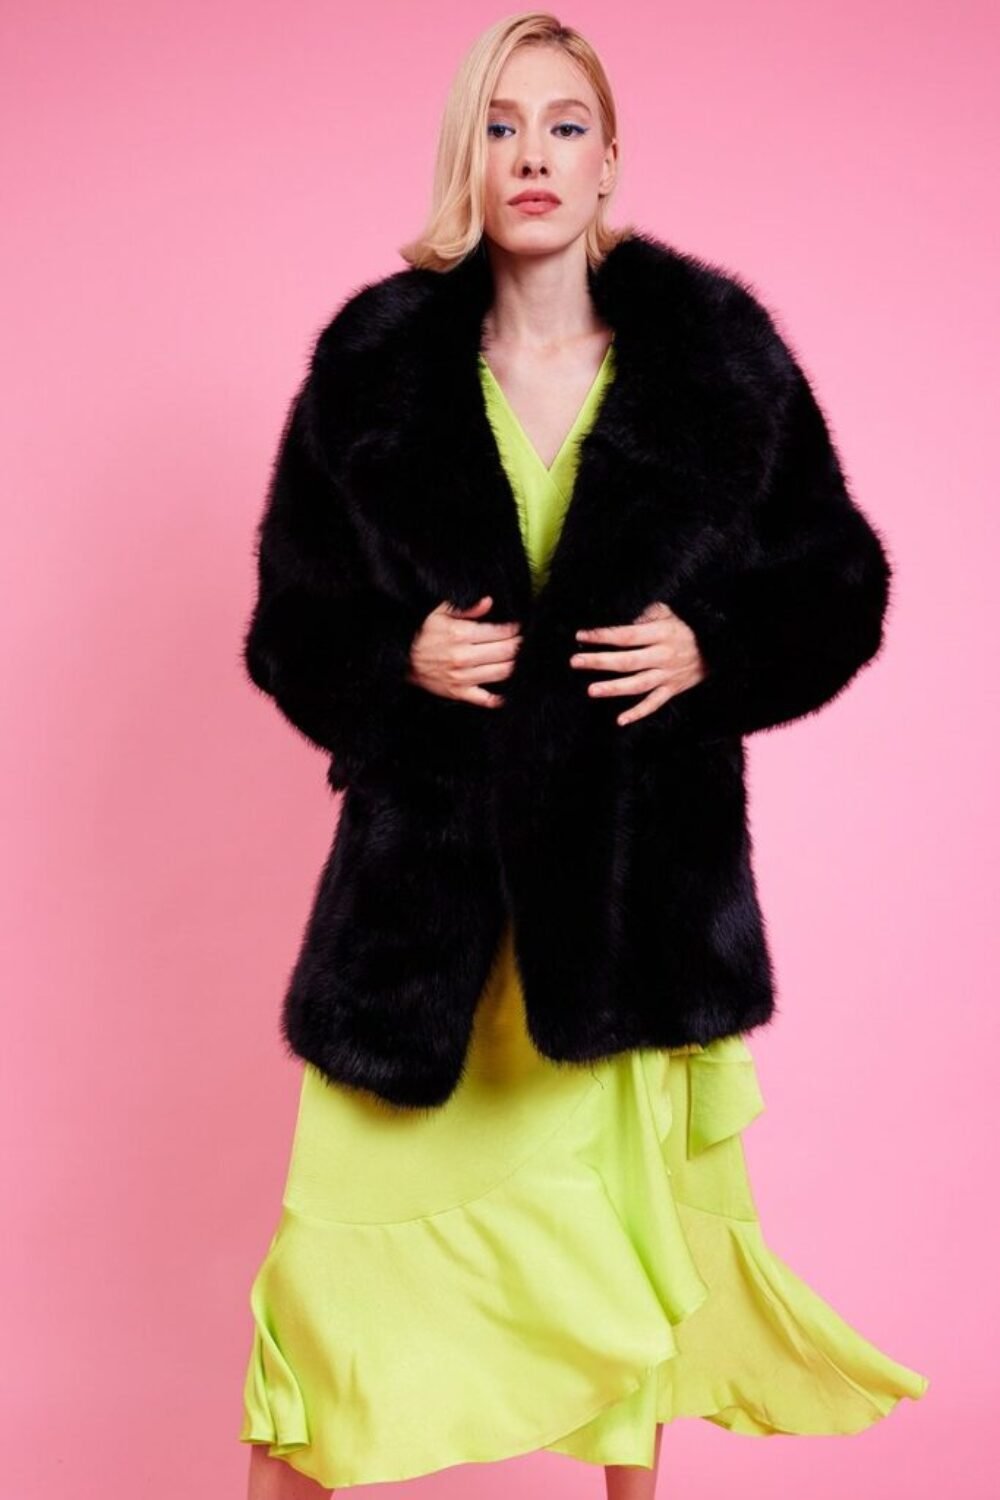 Shop Lux Faux Fur Bamboo Duchess Coat and women's luxury and designer clothes at www.lux-apparel.co.uk